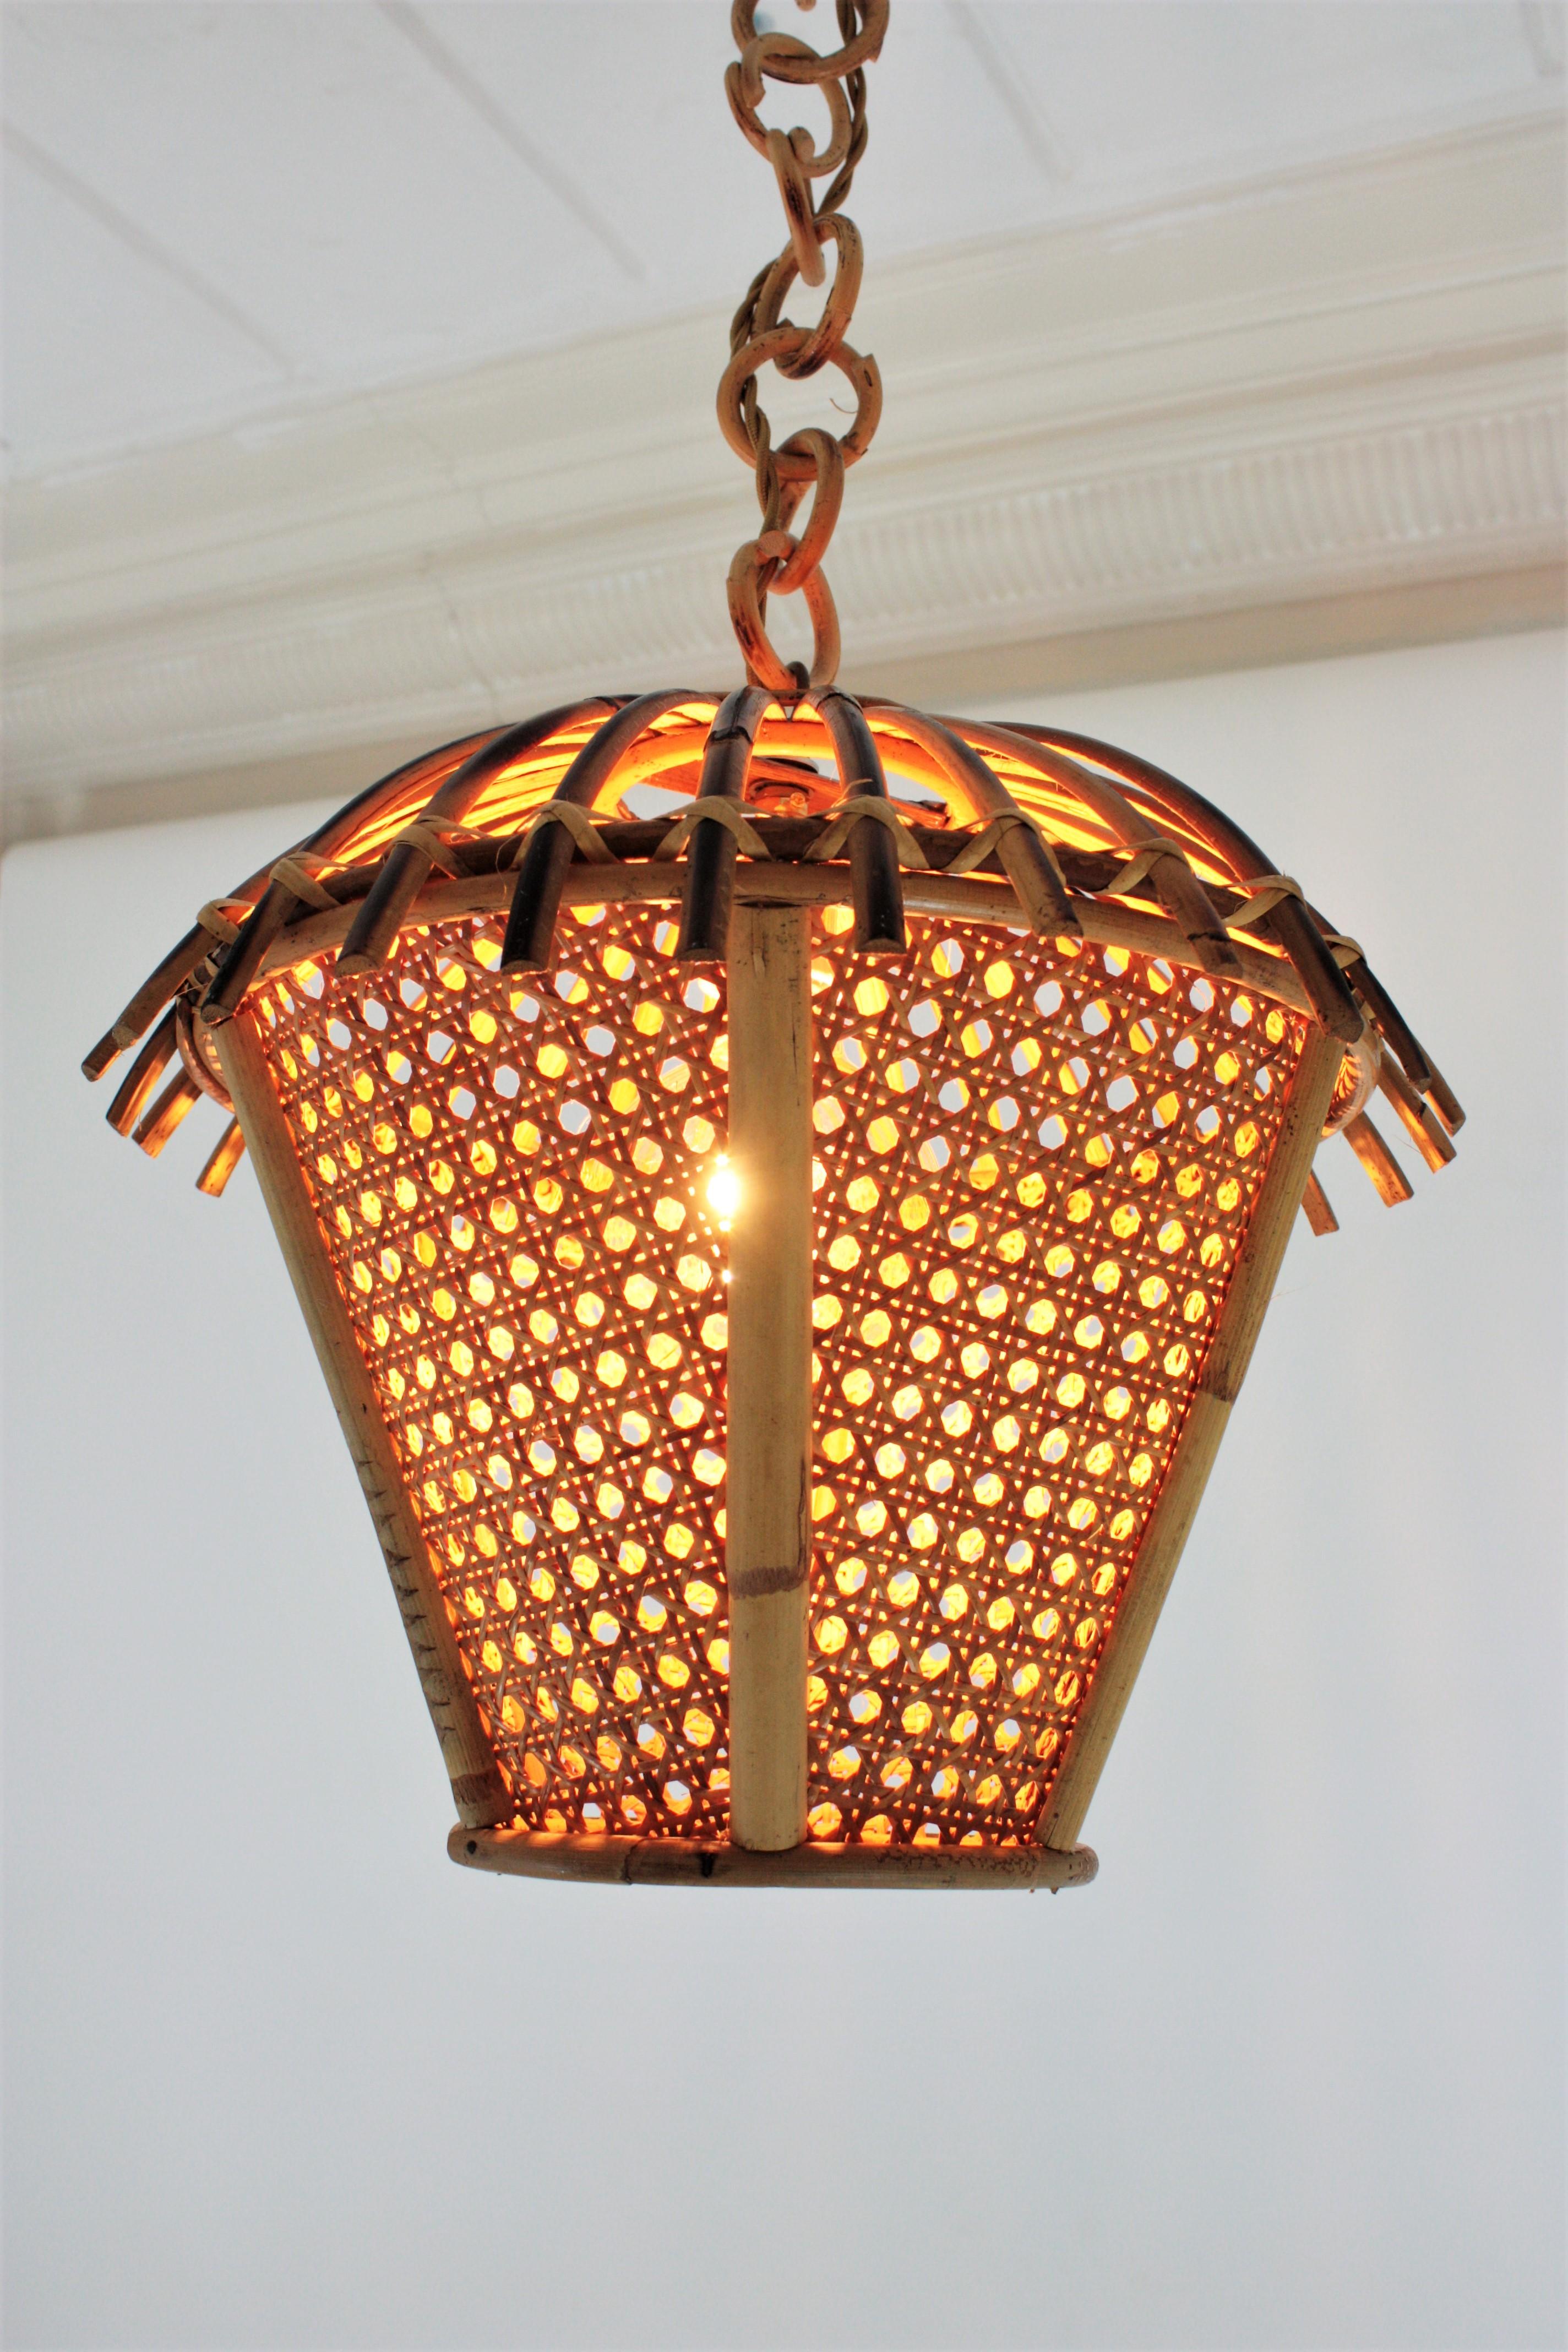 Italian Modernist Rattan and Wicker Wire Pagoda Pendant or Hanging Light, 1960s For Sale 1